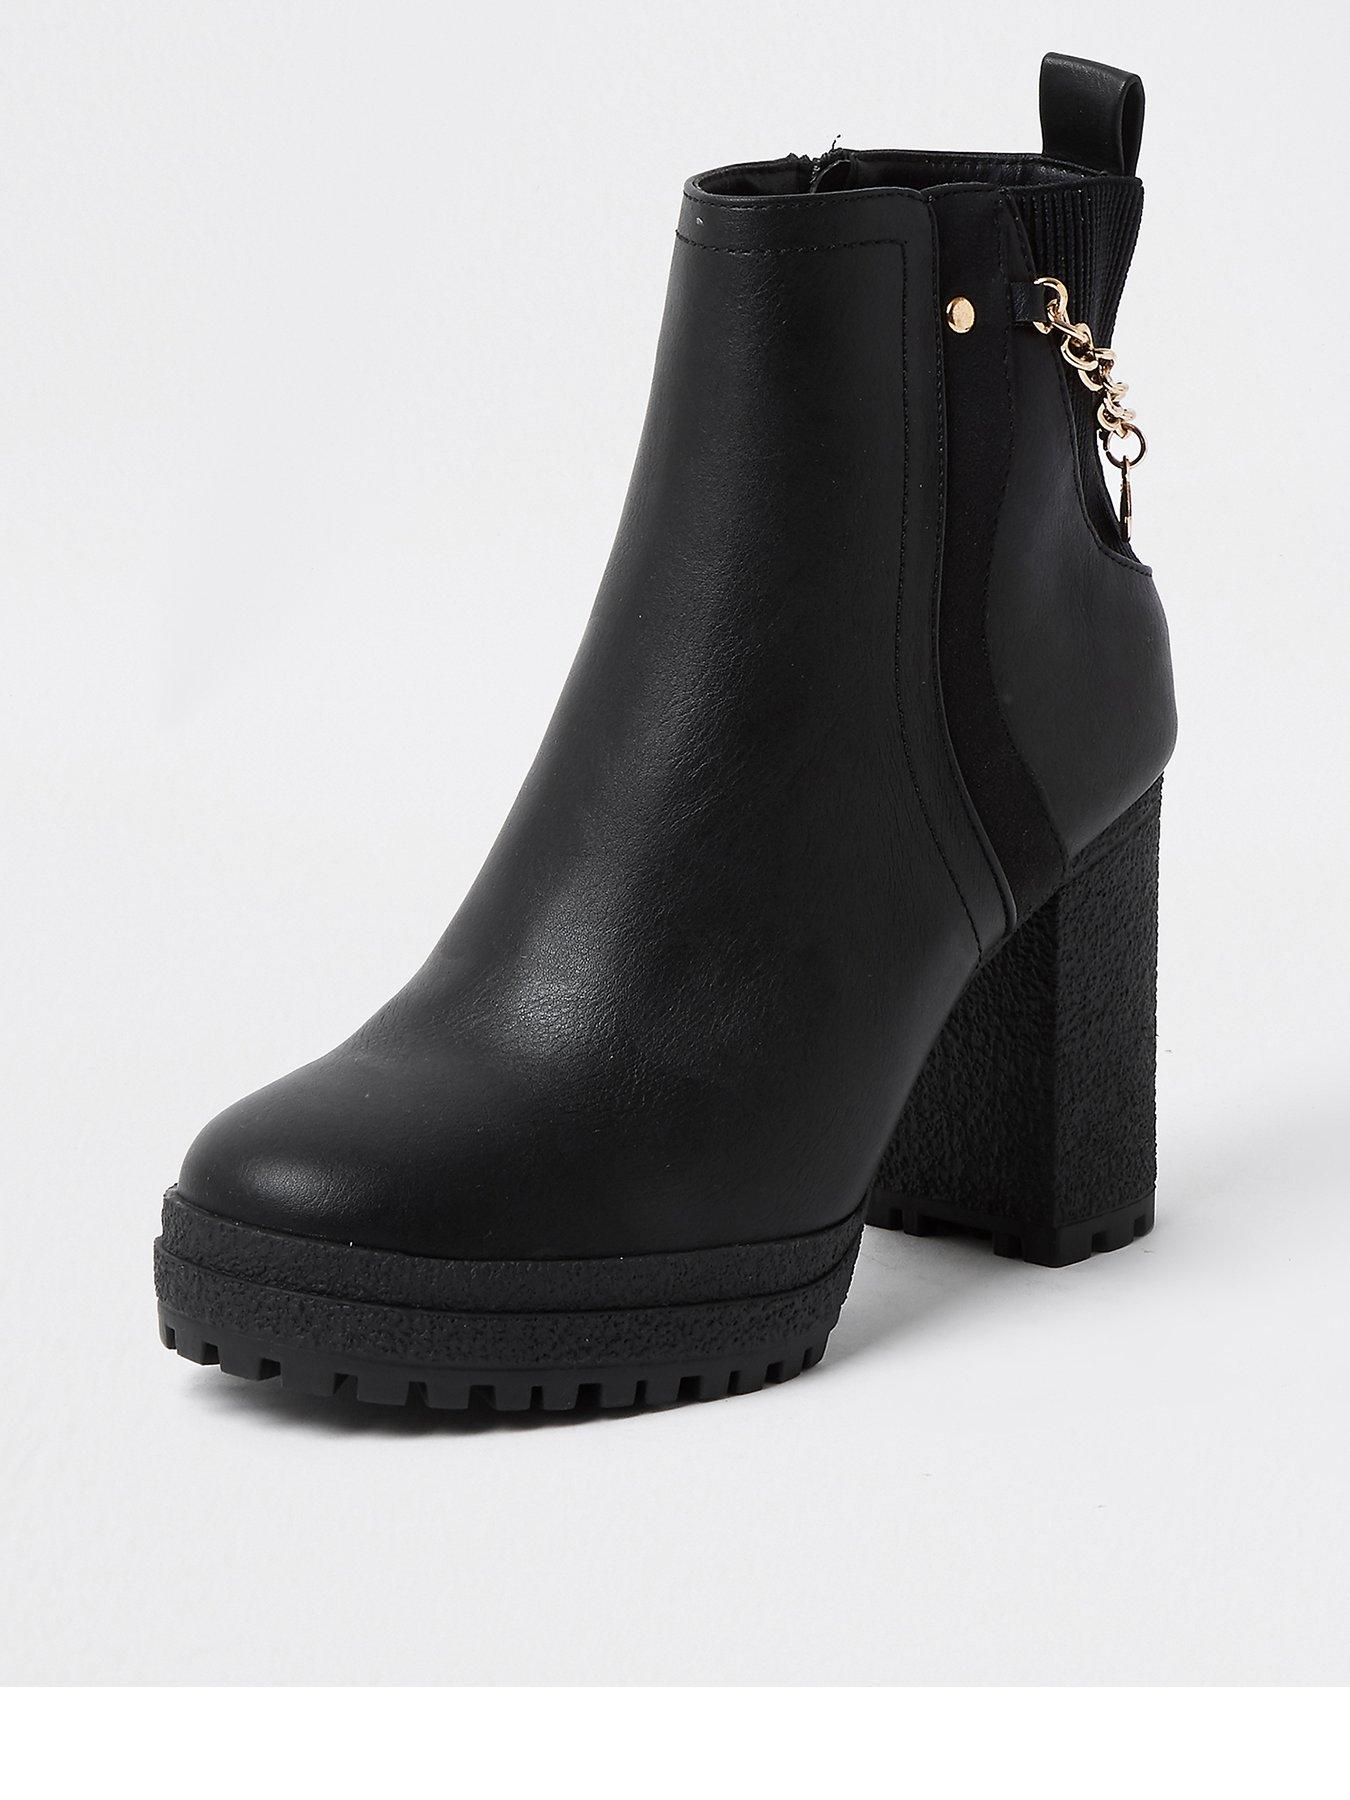 very river island boots